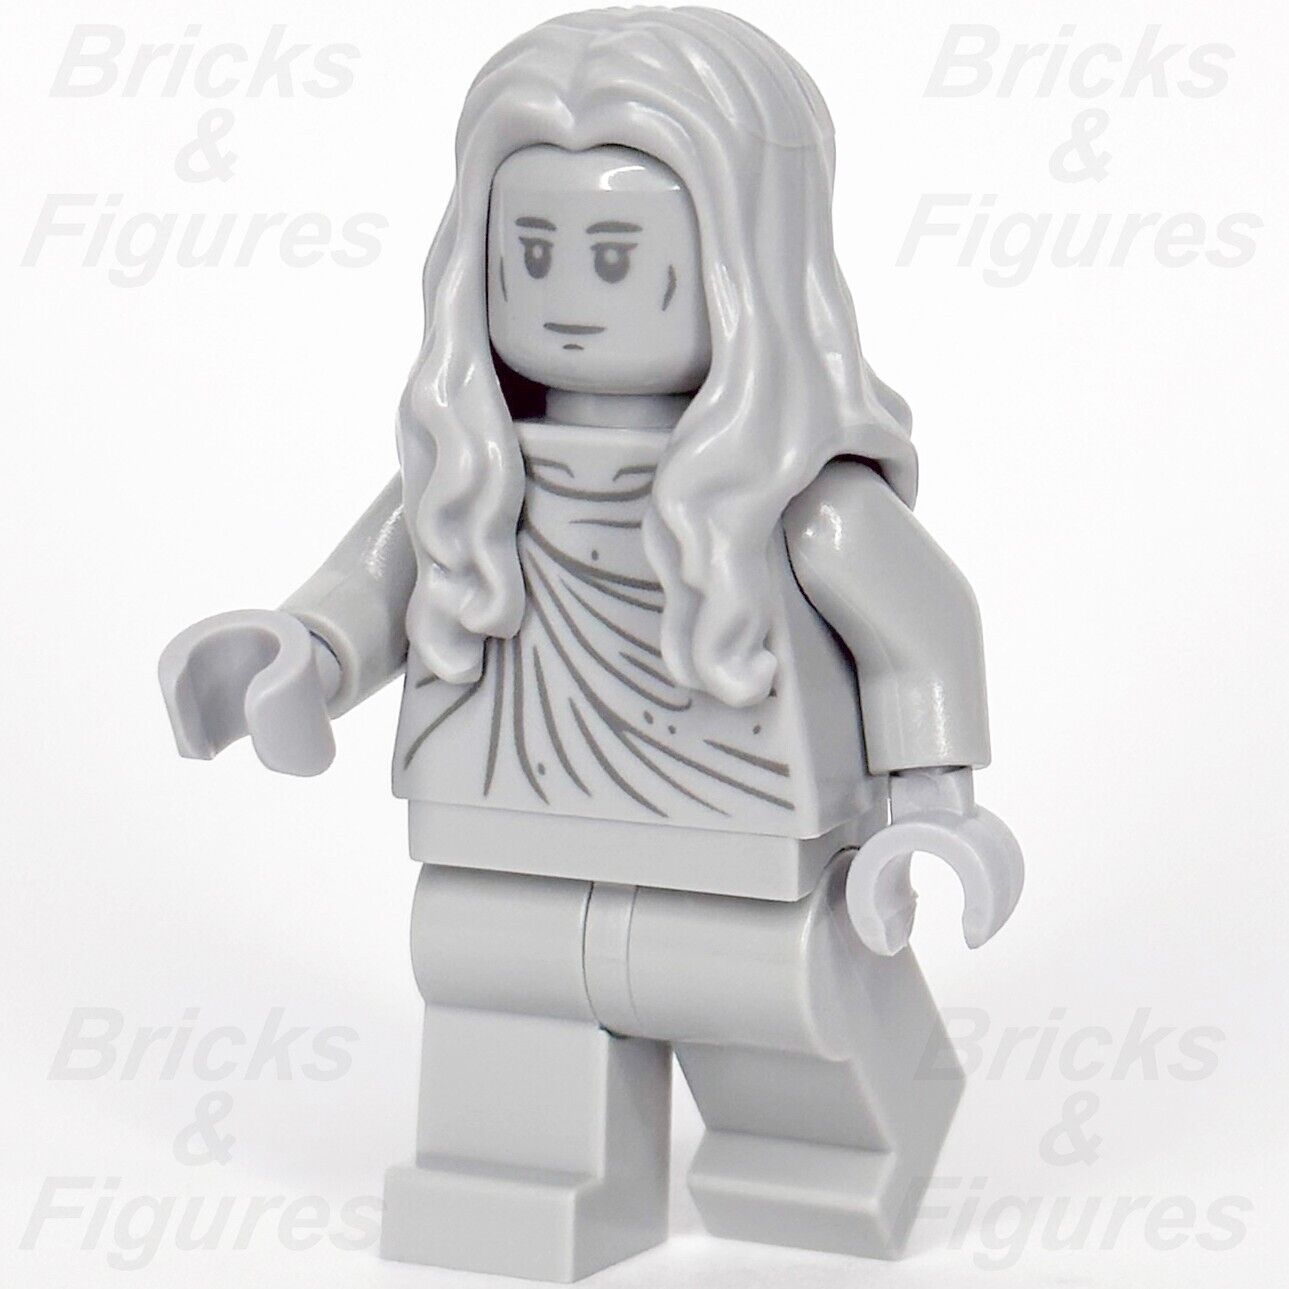 LEGO Elf Statue Minifigure The Hobbit & The Lord of the Rings 10316 lor115 LOTR - Bricks & Figures